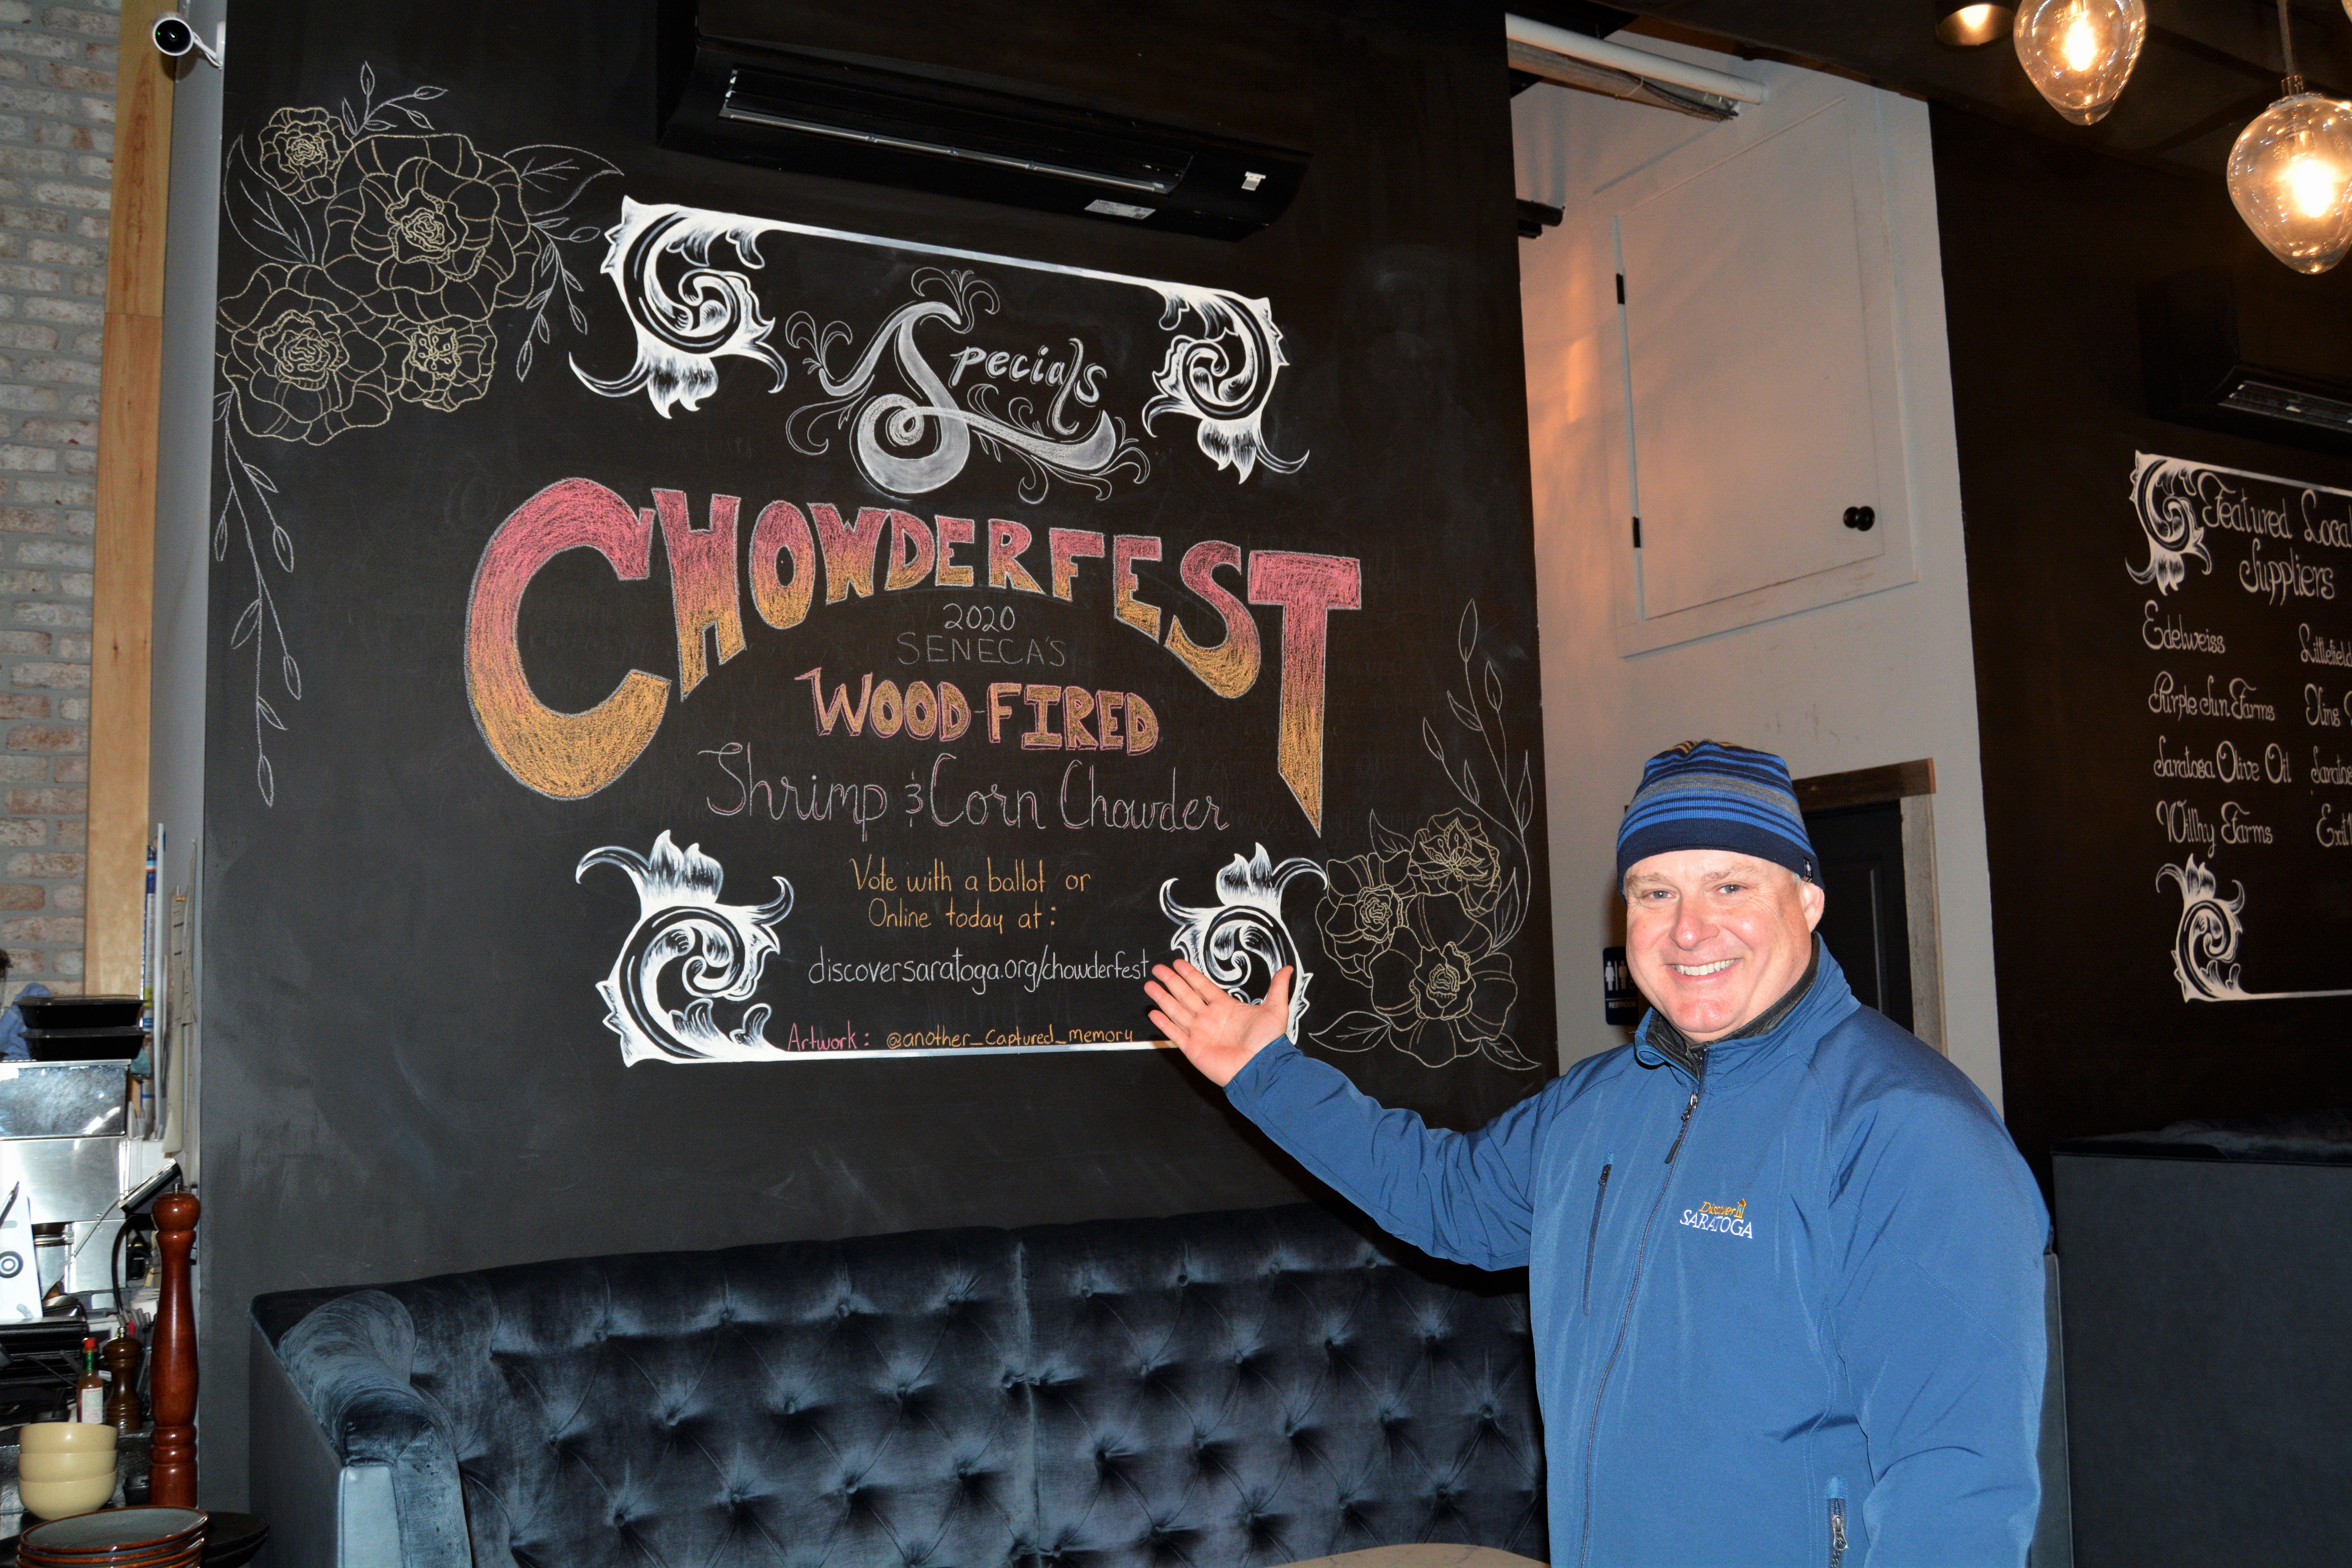 Darryl in front of Chowderfest sign at Seneca